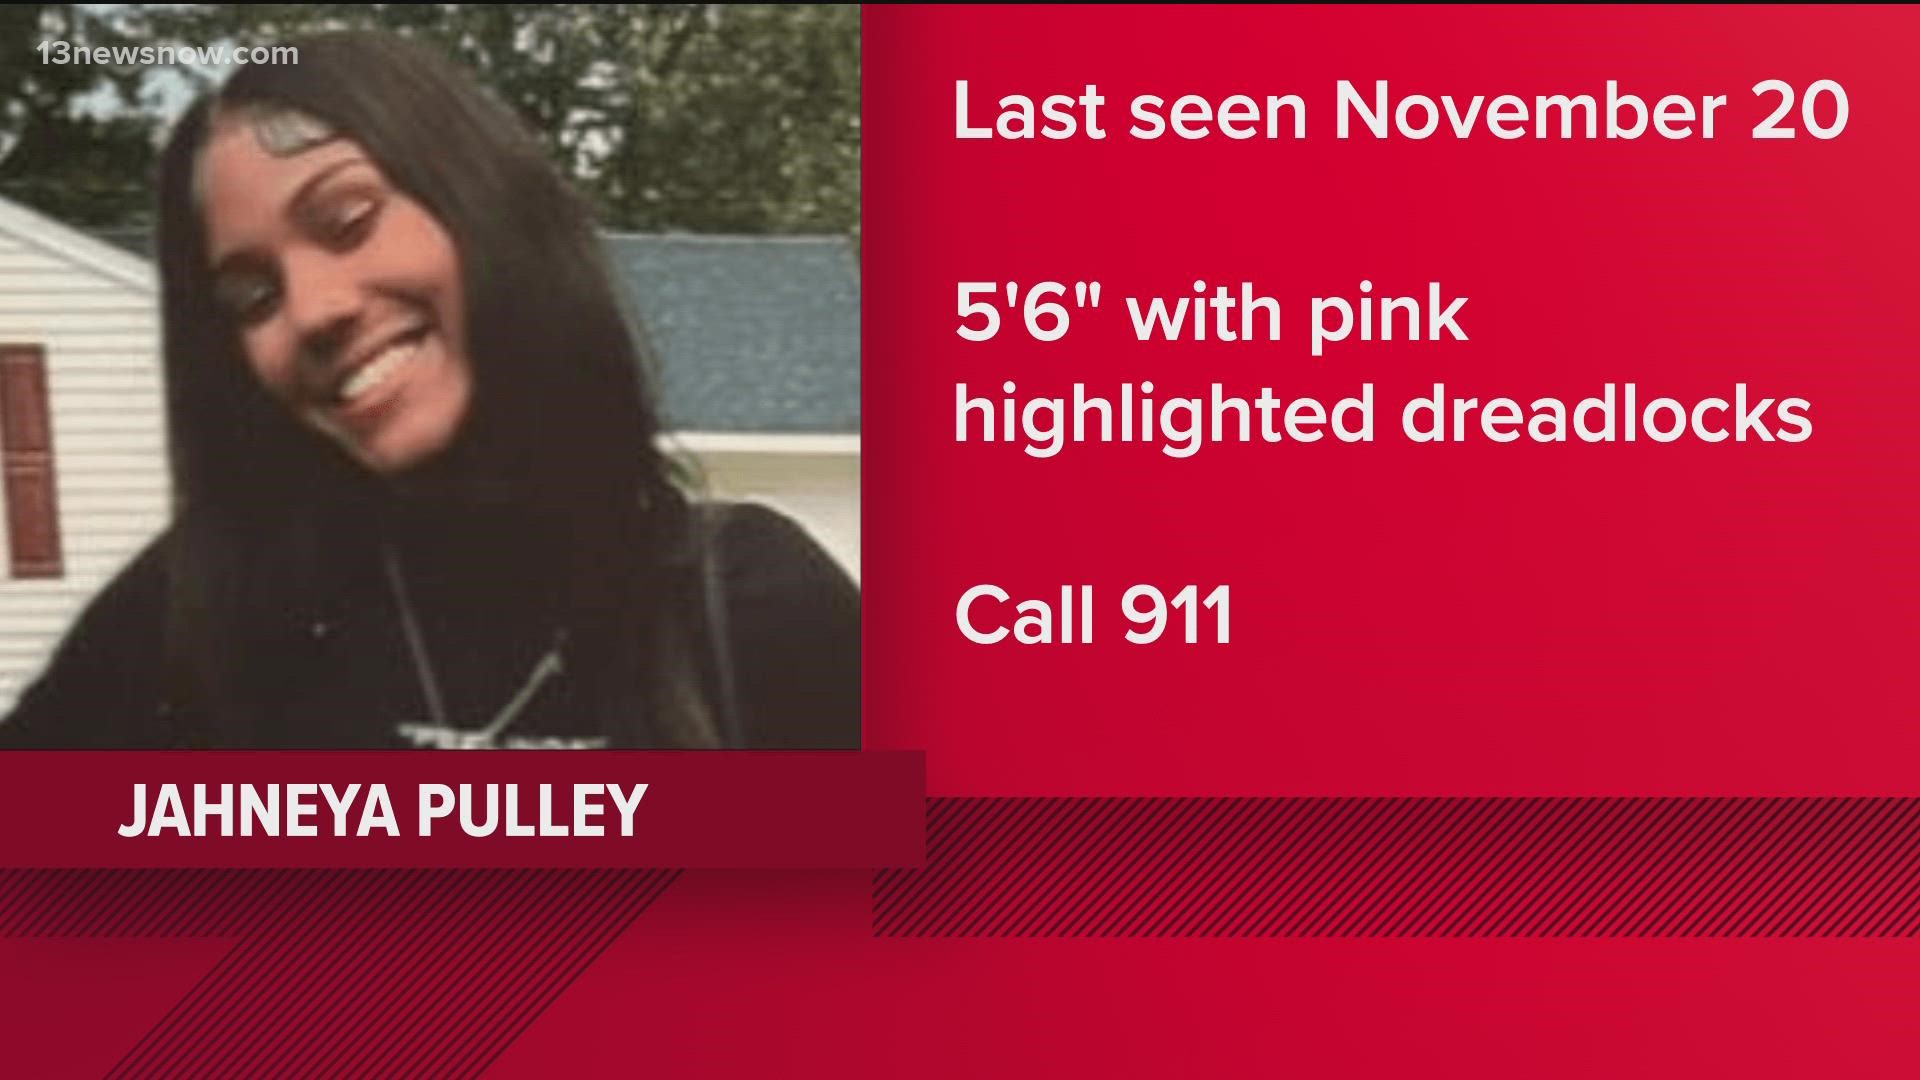 we're told Jahneya Pulley hasn't been seen since Sunday. Police are worried about her safety.